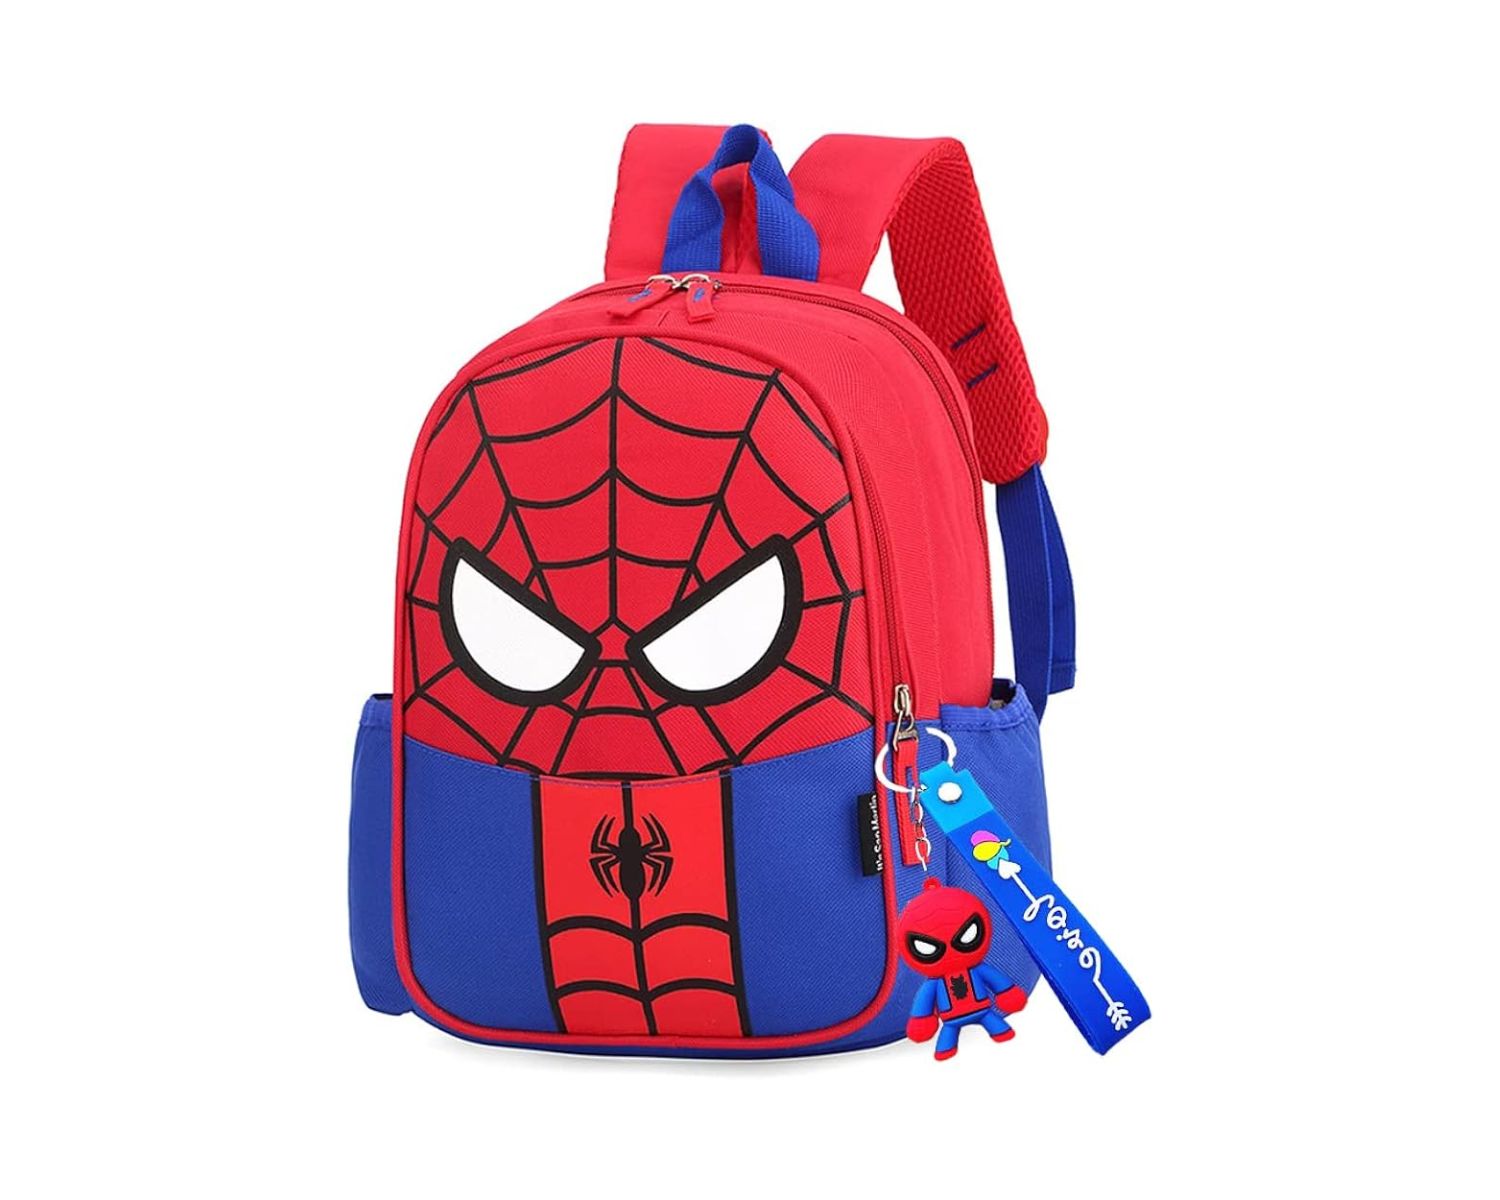 14-fascinating-facts-about-spiderman-backpack